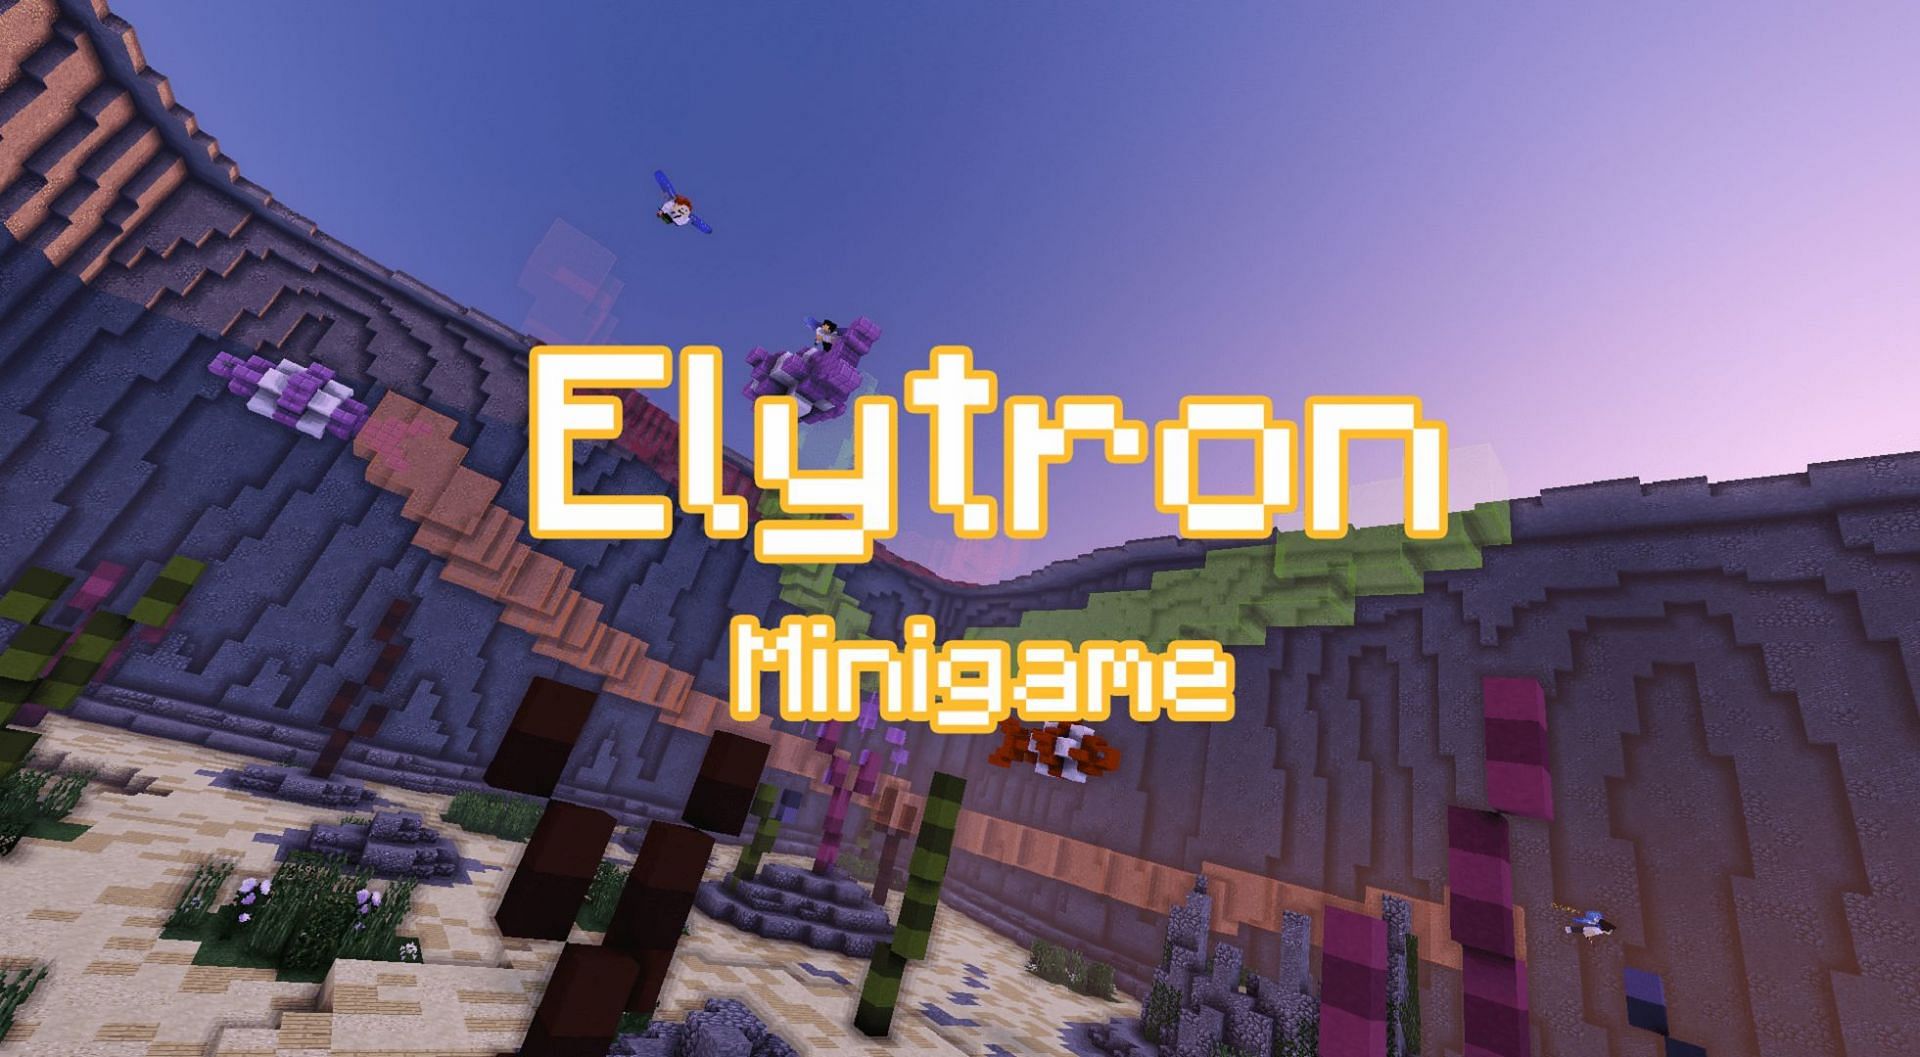 Fans of the Tron films will get a real kick out of Elytron (Image via Theticman/Minecraft Maps)